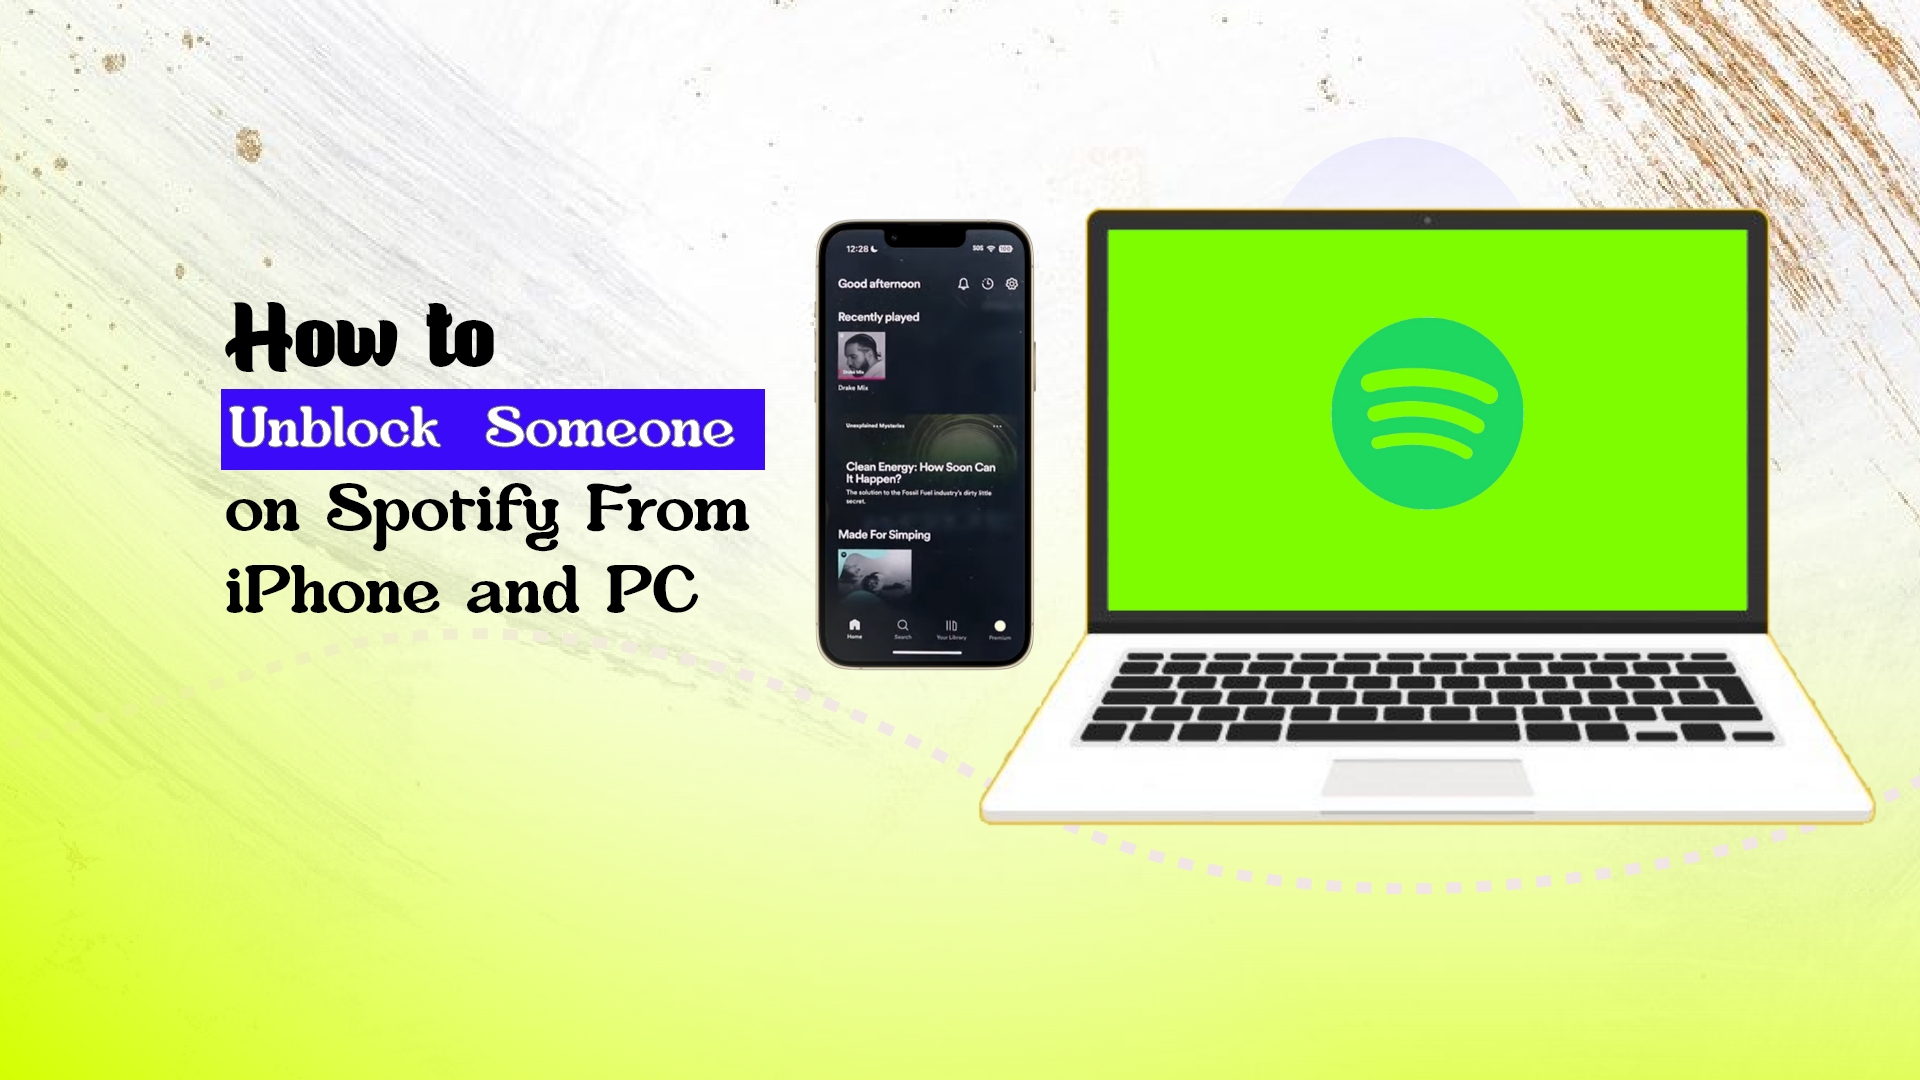 How to Unblock Someone on Spotify from iPhone, Android, or Computer